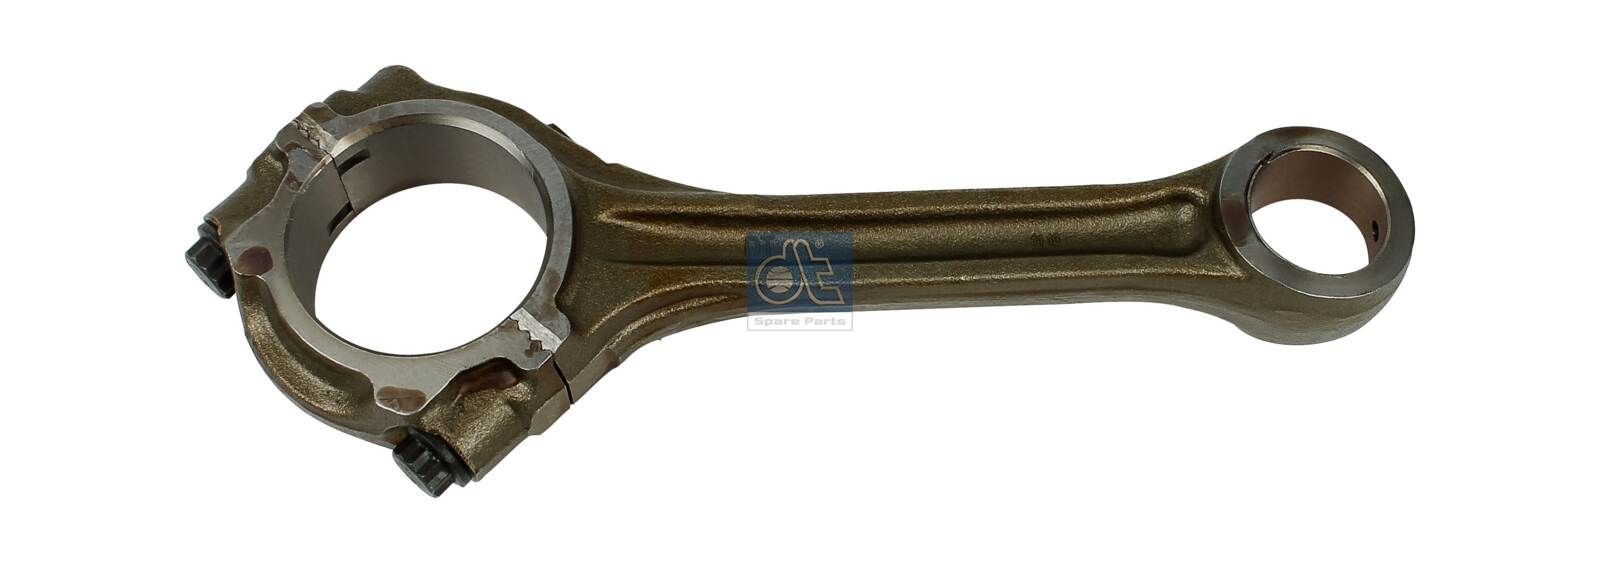 DT Spare Parts 4.61113 Connecting Rod A 366 030 36 20